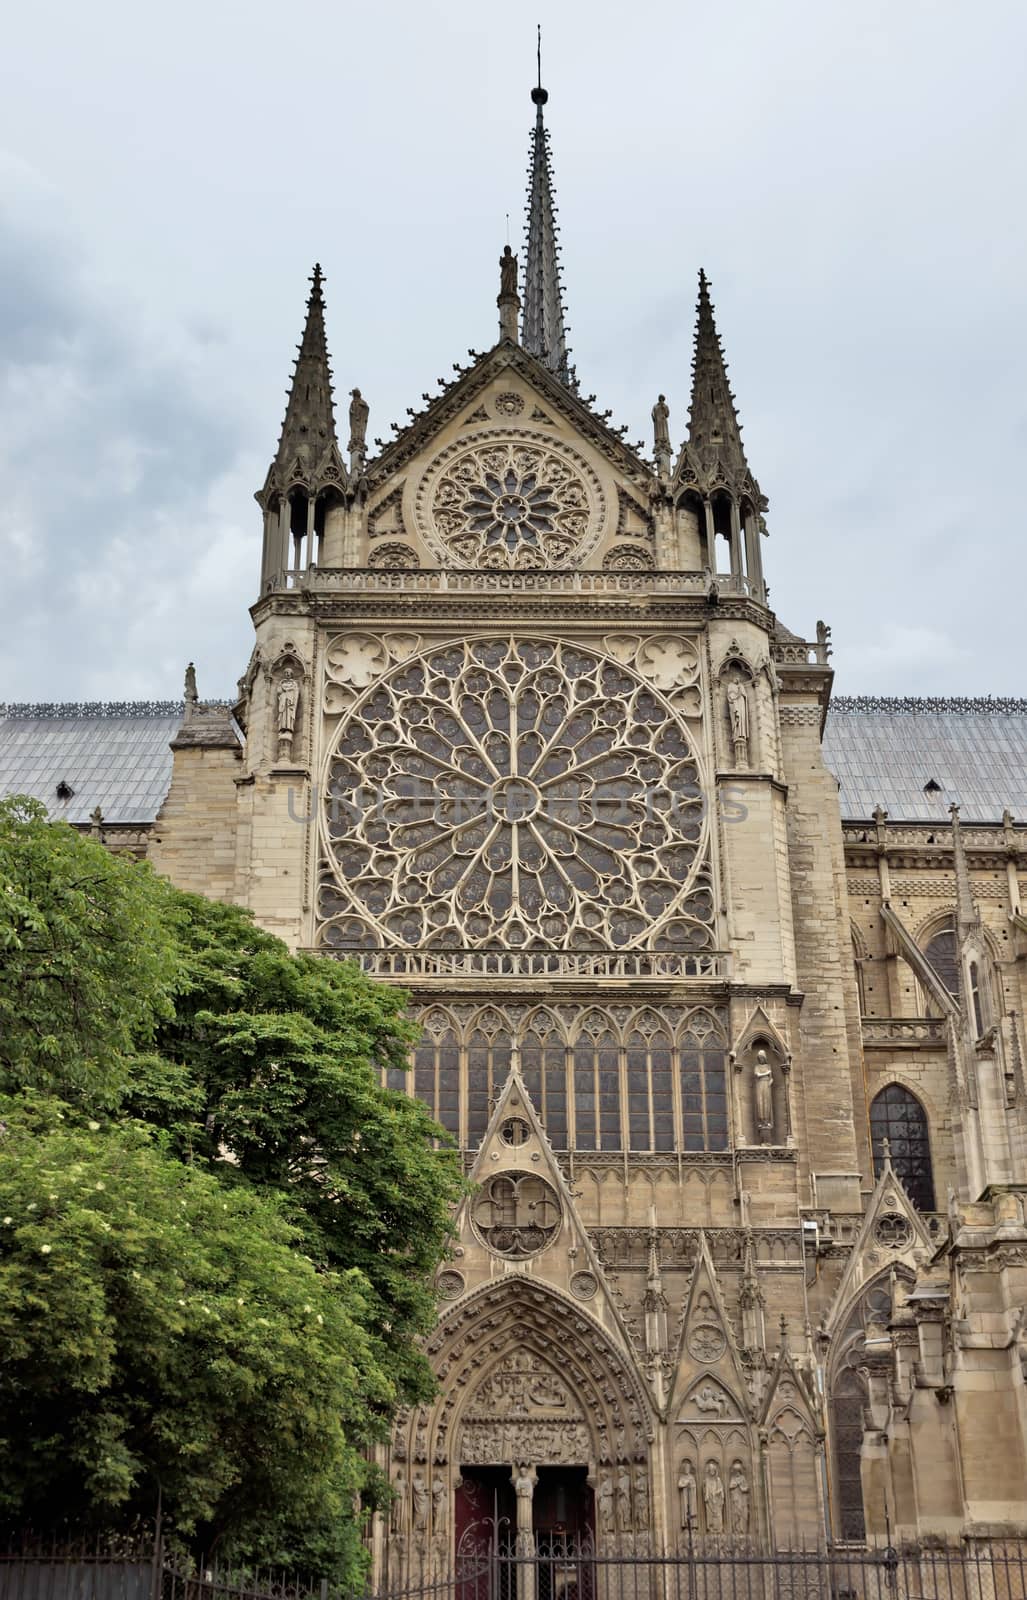 View of the Cathedral of Notre Dame, Paris, France.